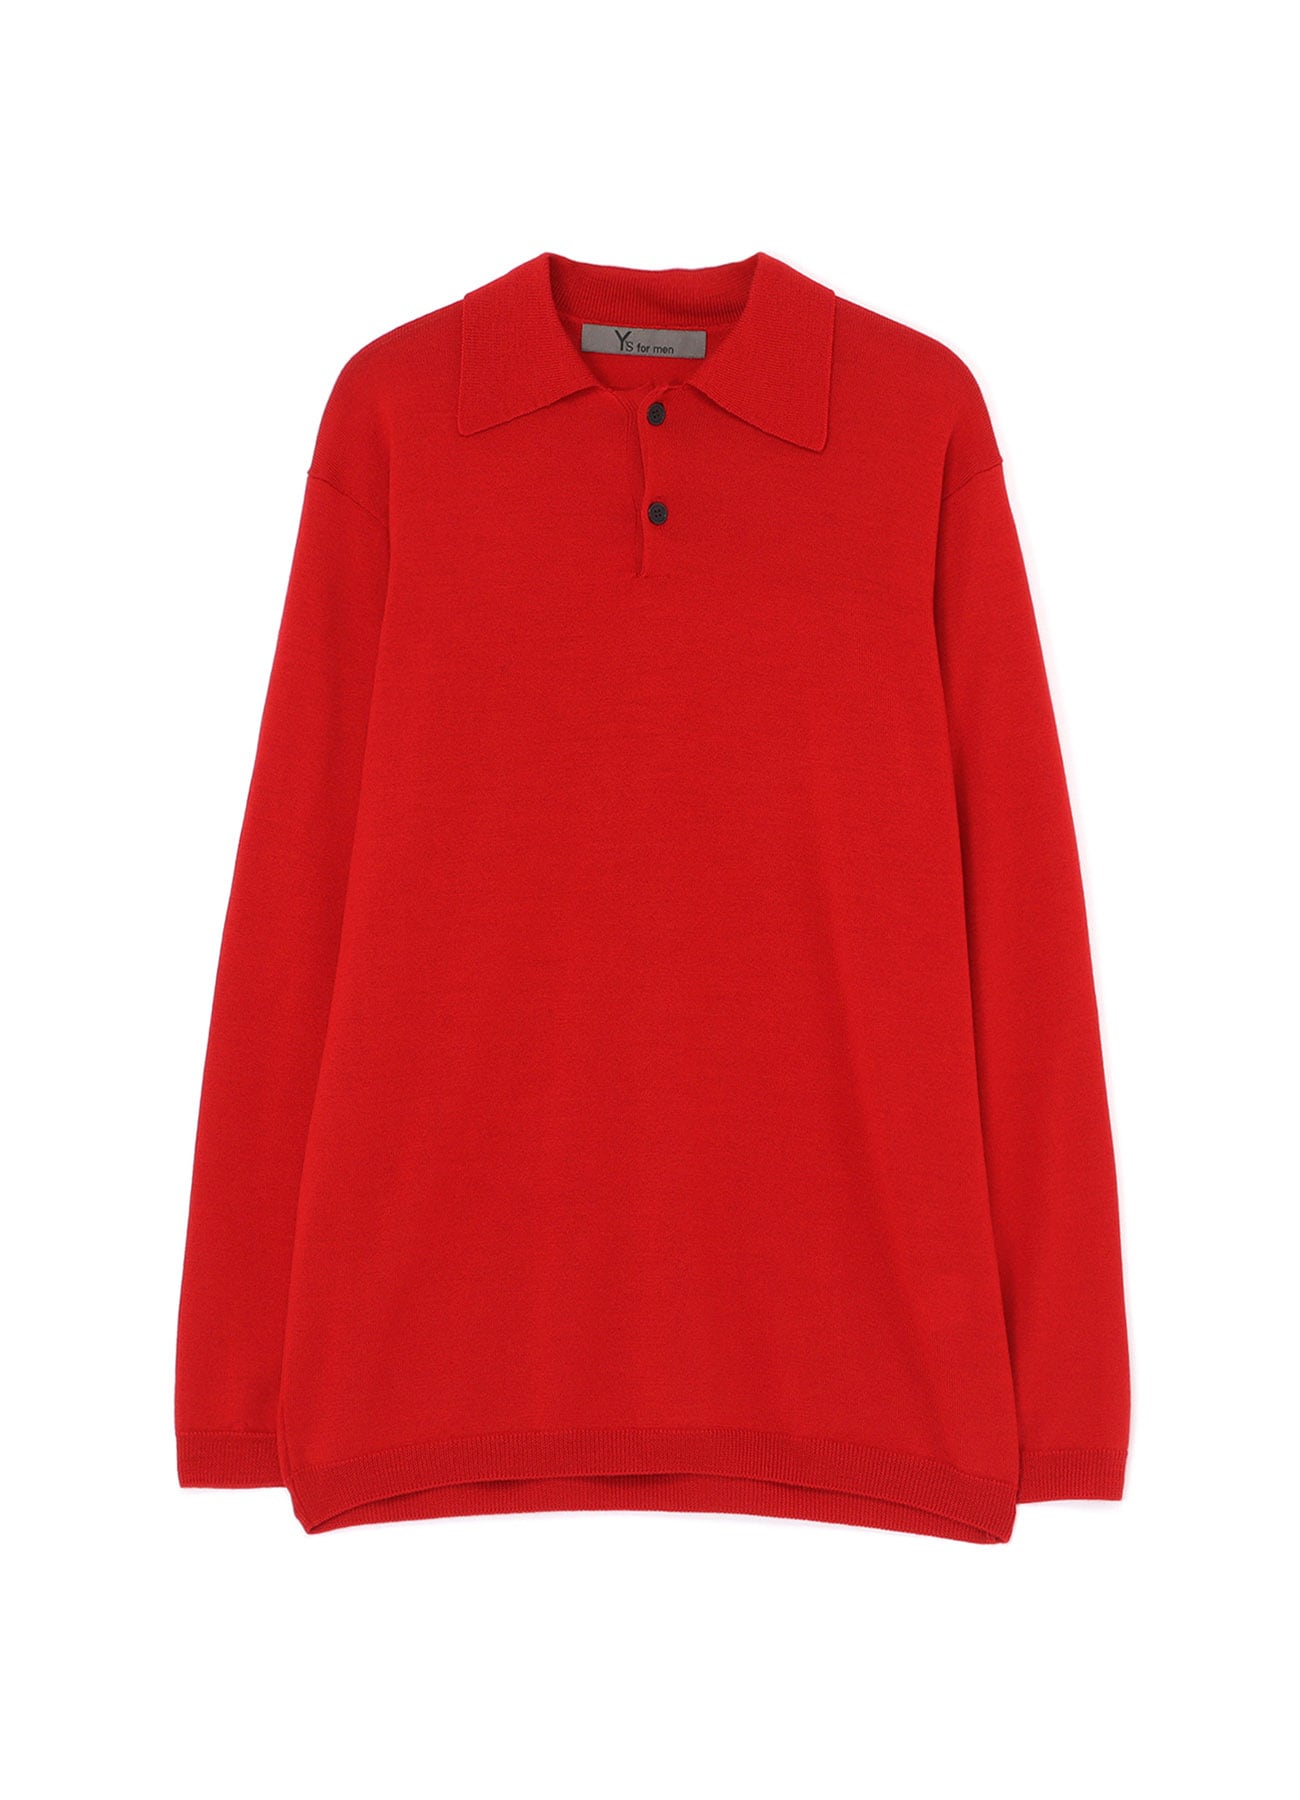 12G JERSEY Y's for men LOGO POLO KNIT